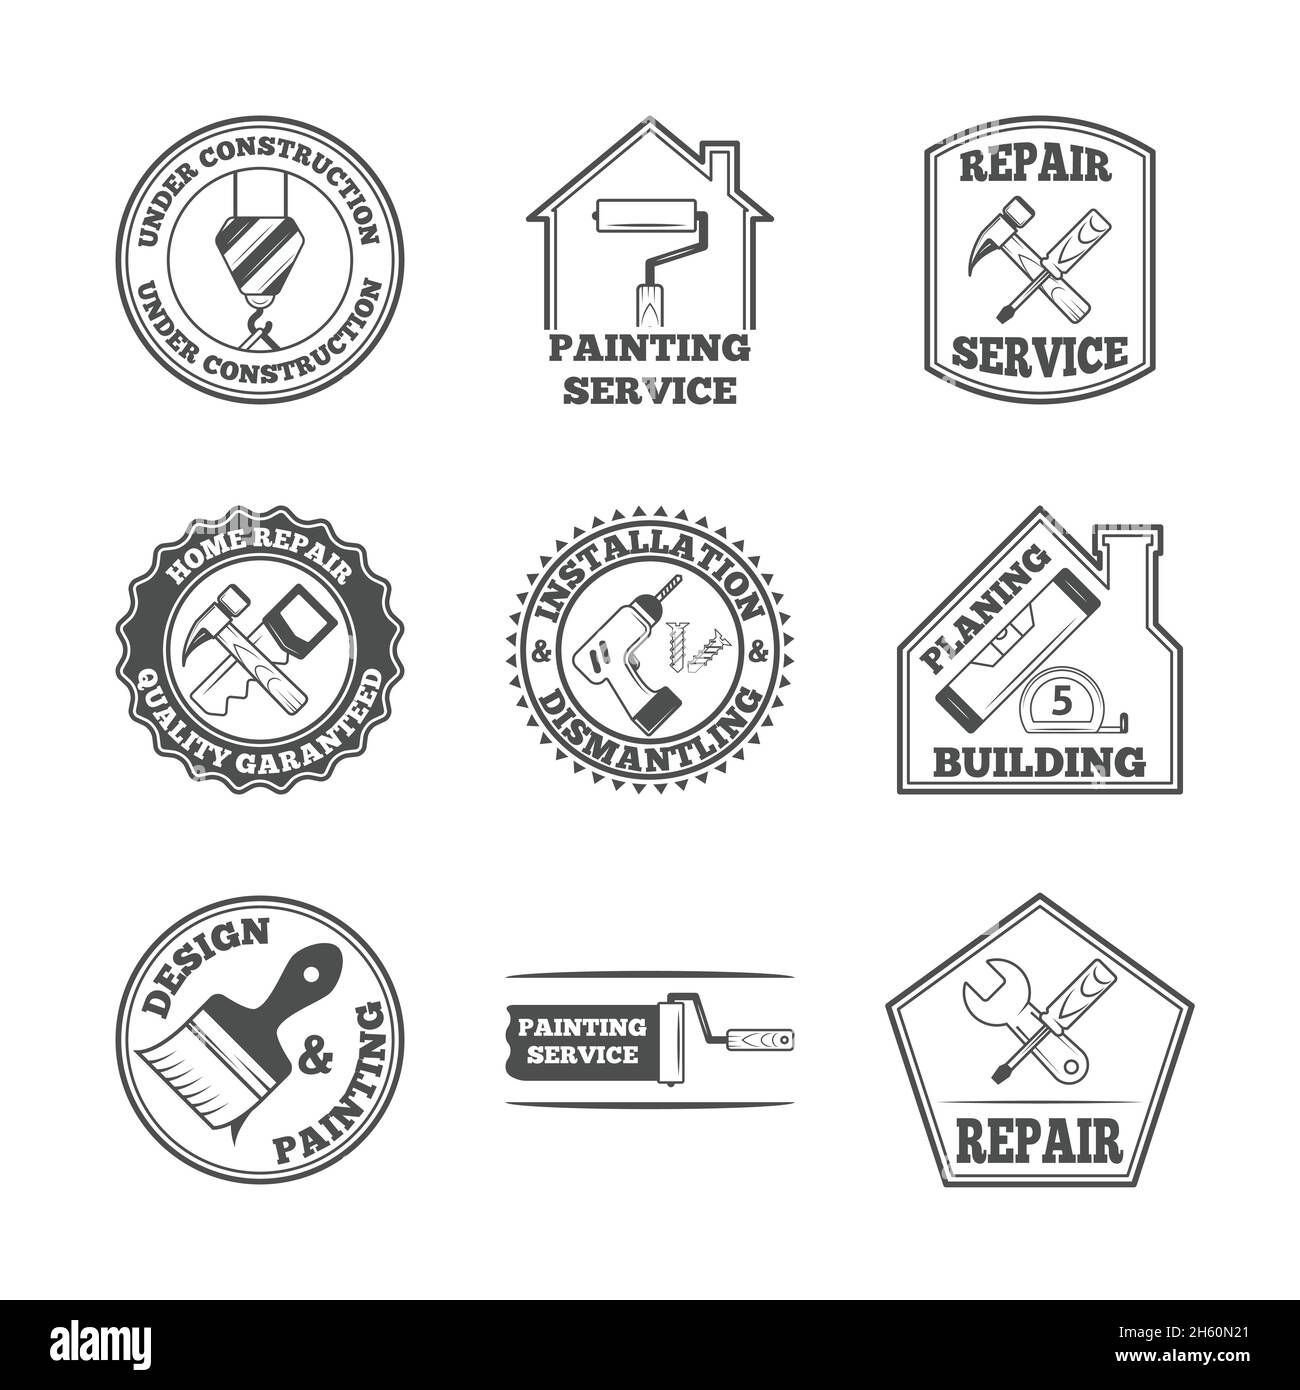 Home repair panting service quality building installation design labels set with black tools icons isolated  vector illustration Stock Vector